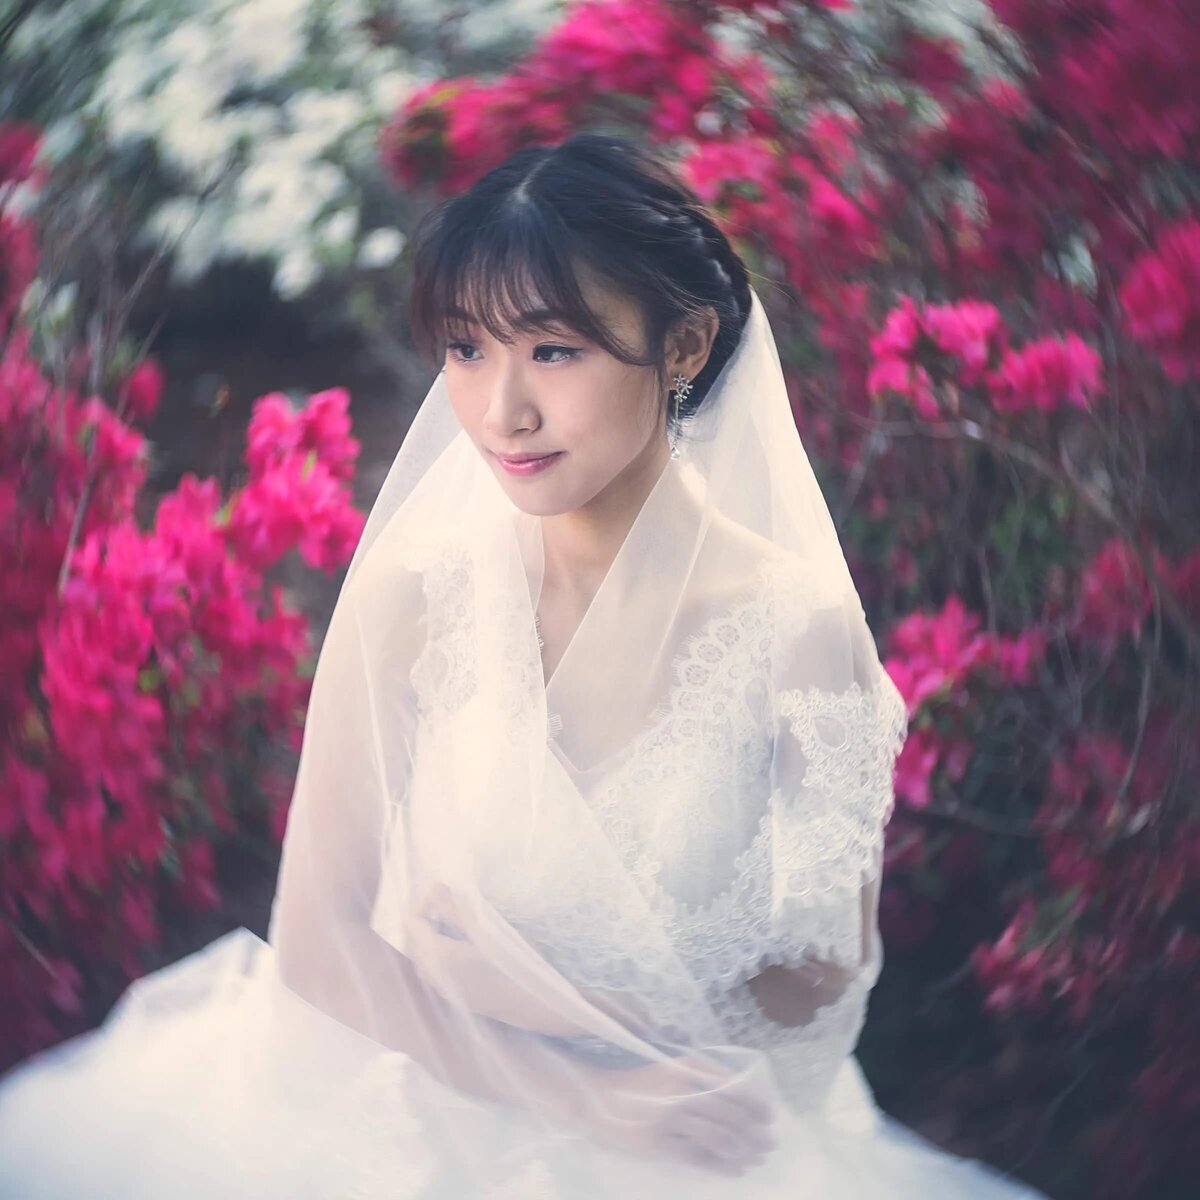 A bride sitting in front of bright flowers